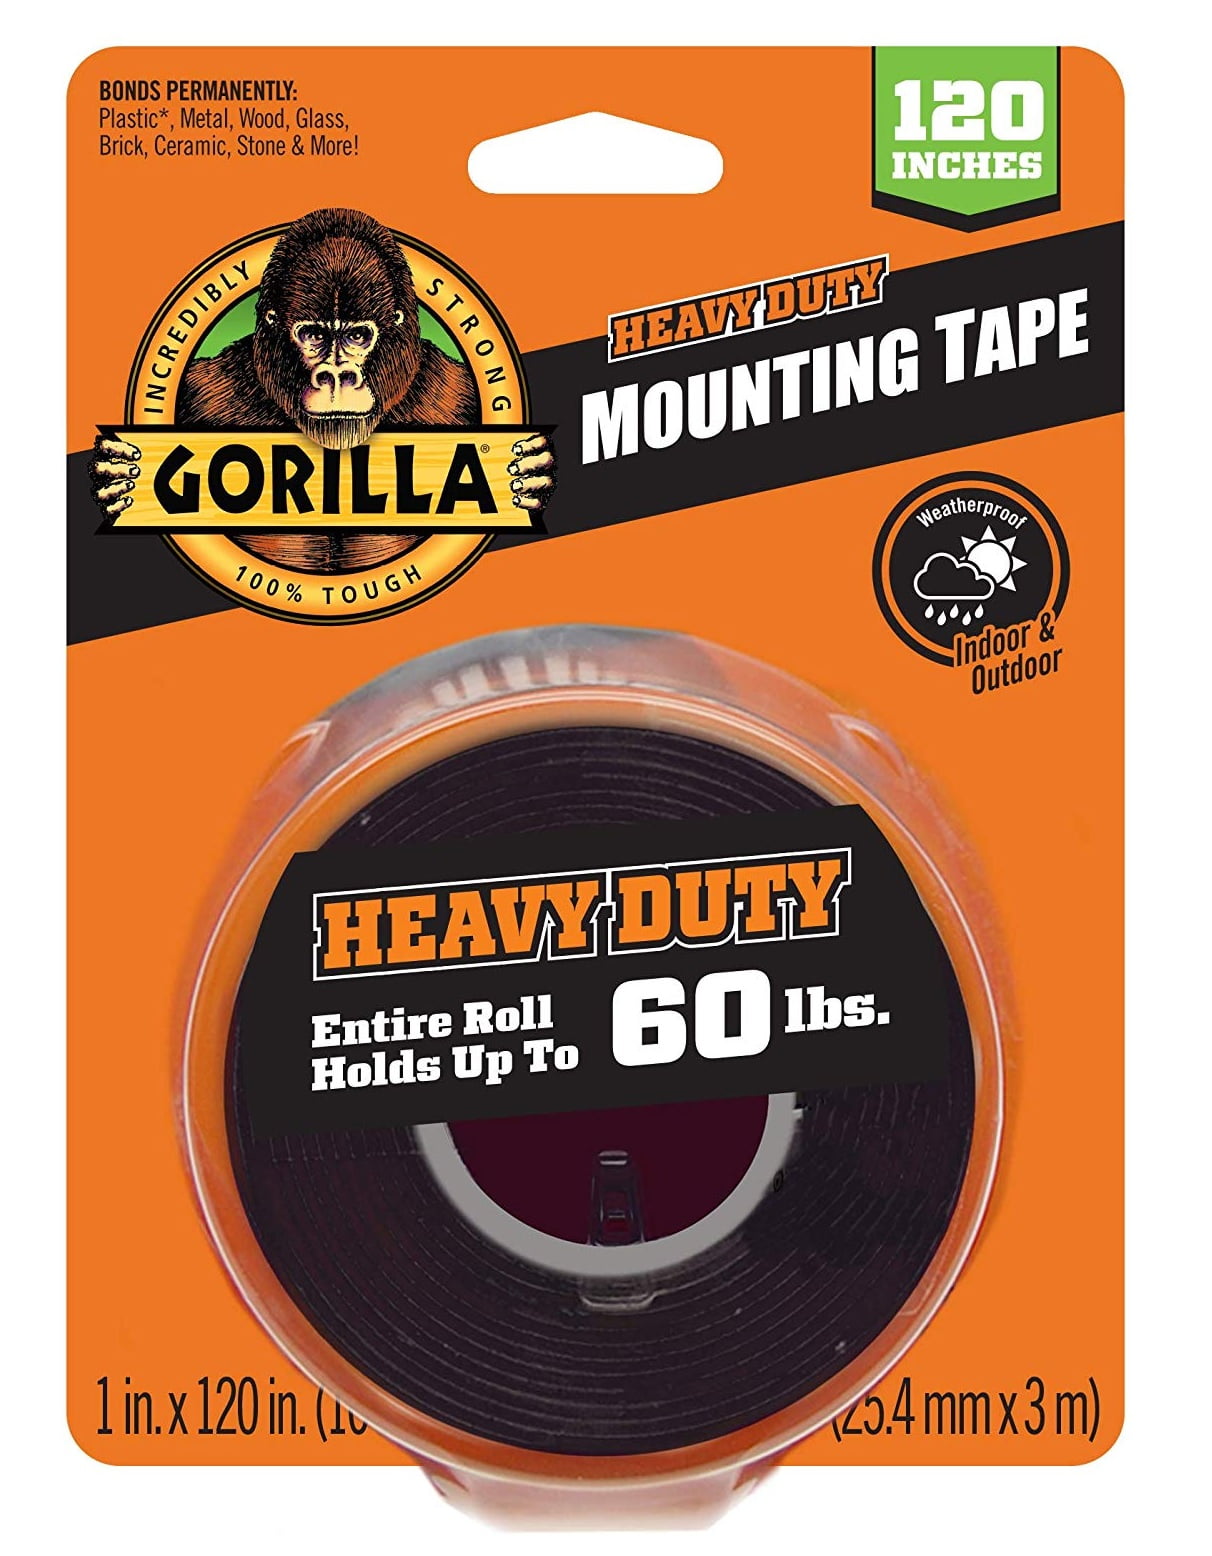 Holds 5 lb 1x60 Heavy-Duty Exterior Mounting Tape New Version 